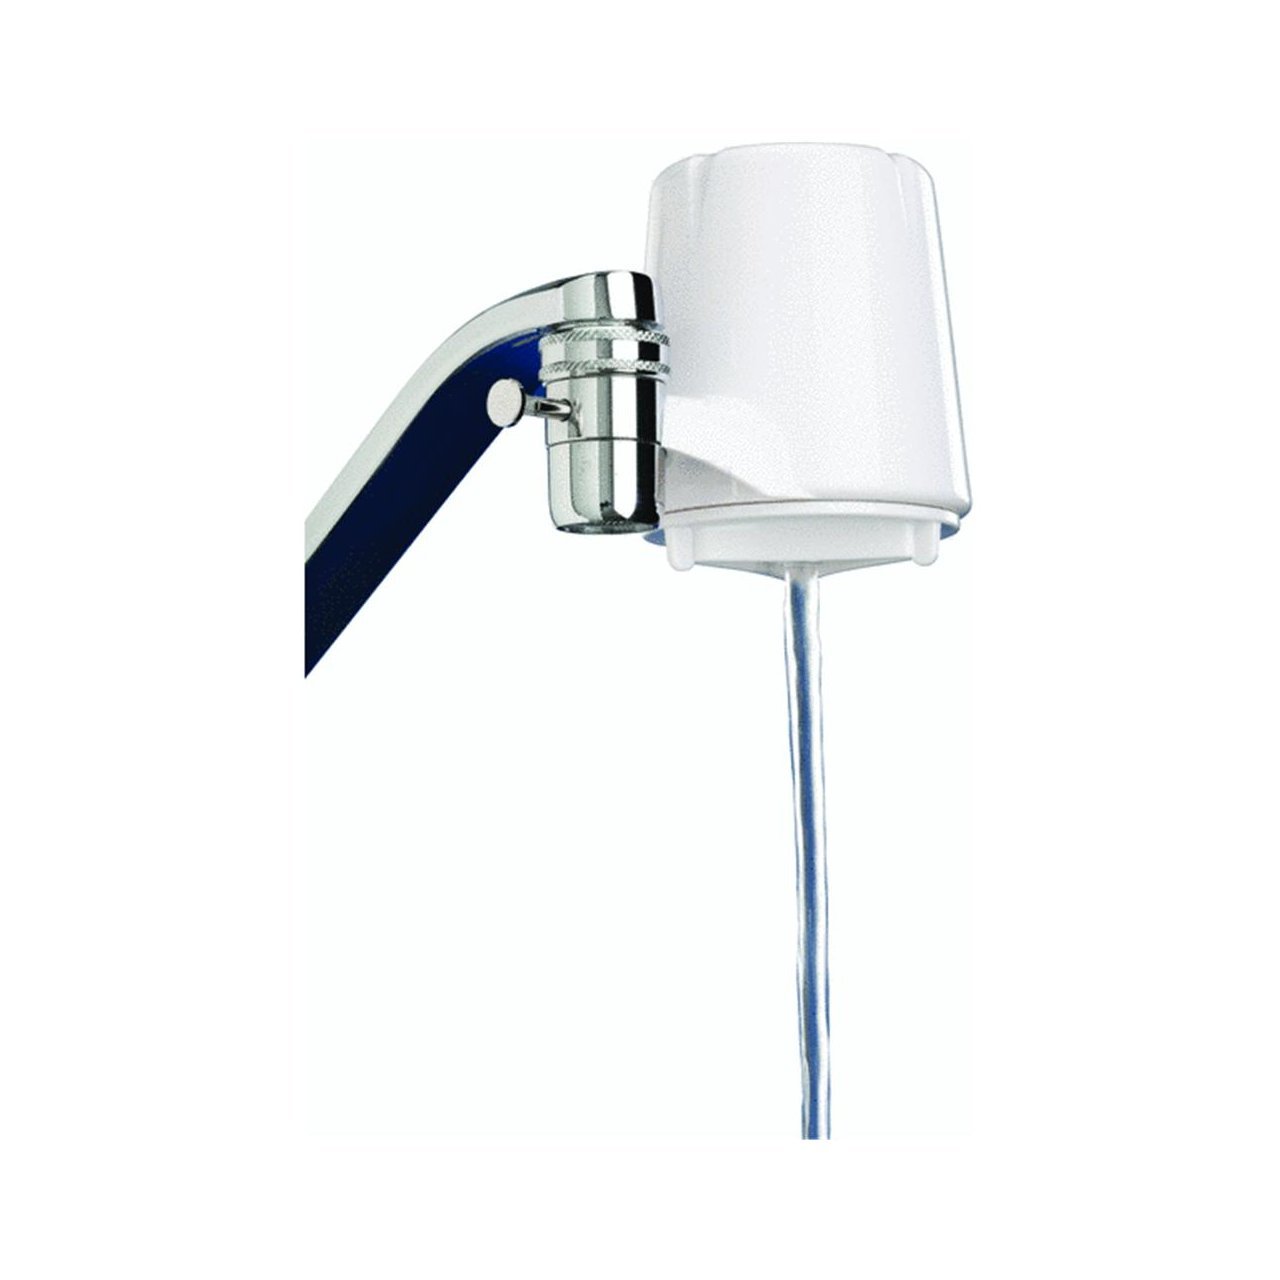 Faucet Water Filter Reviews Water Filters Center